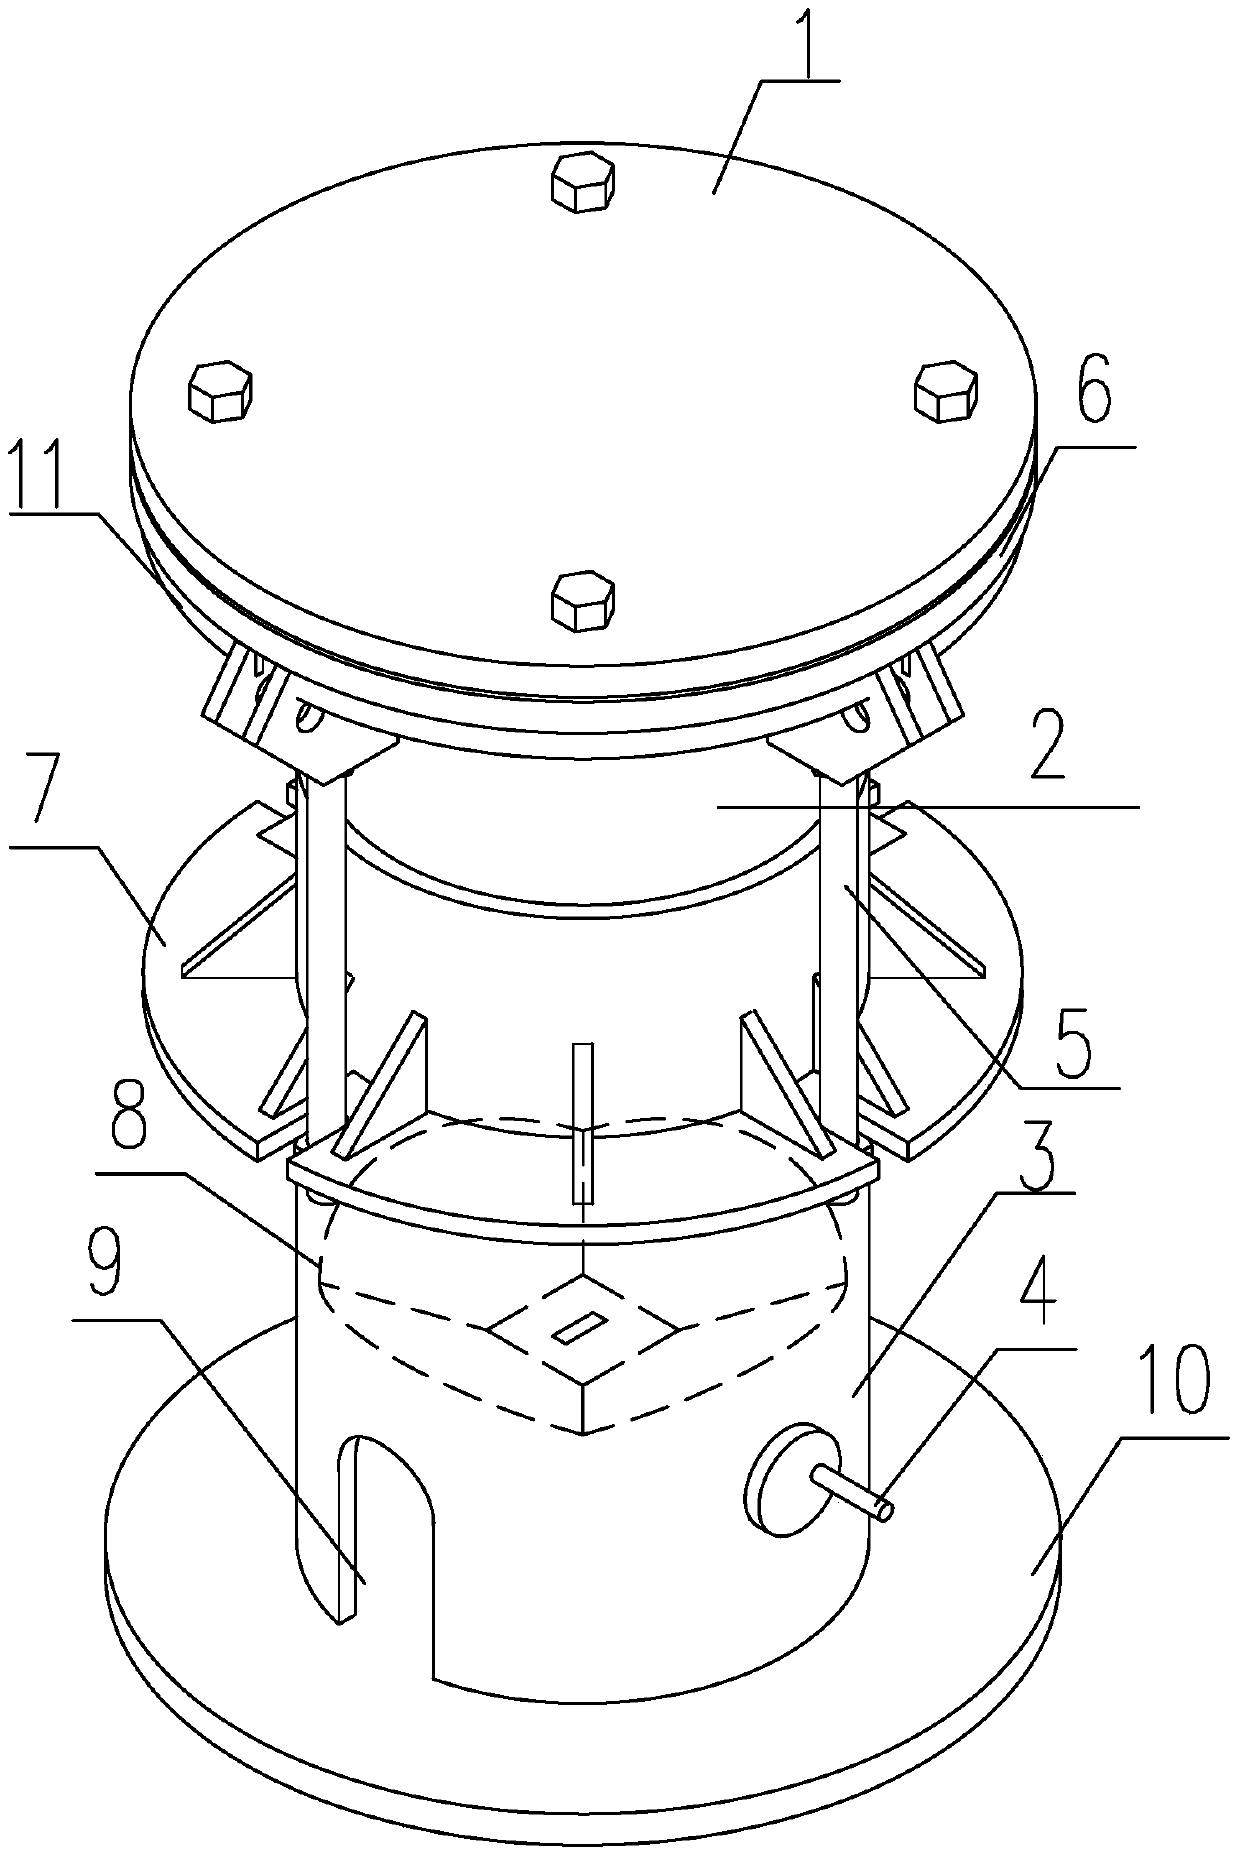 A funnel type sand box unloading device and method